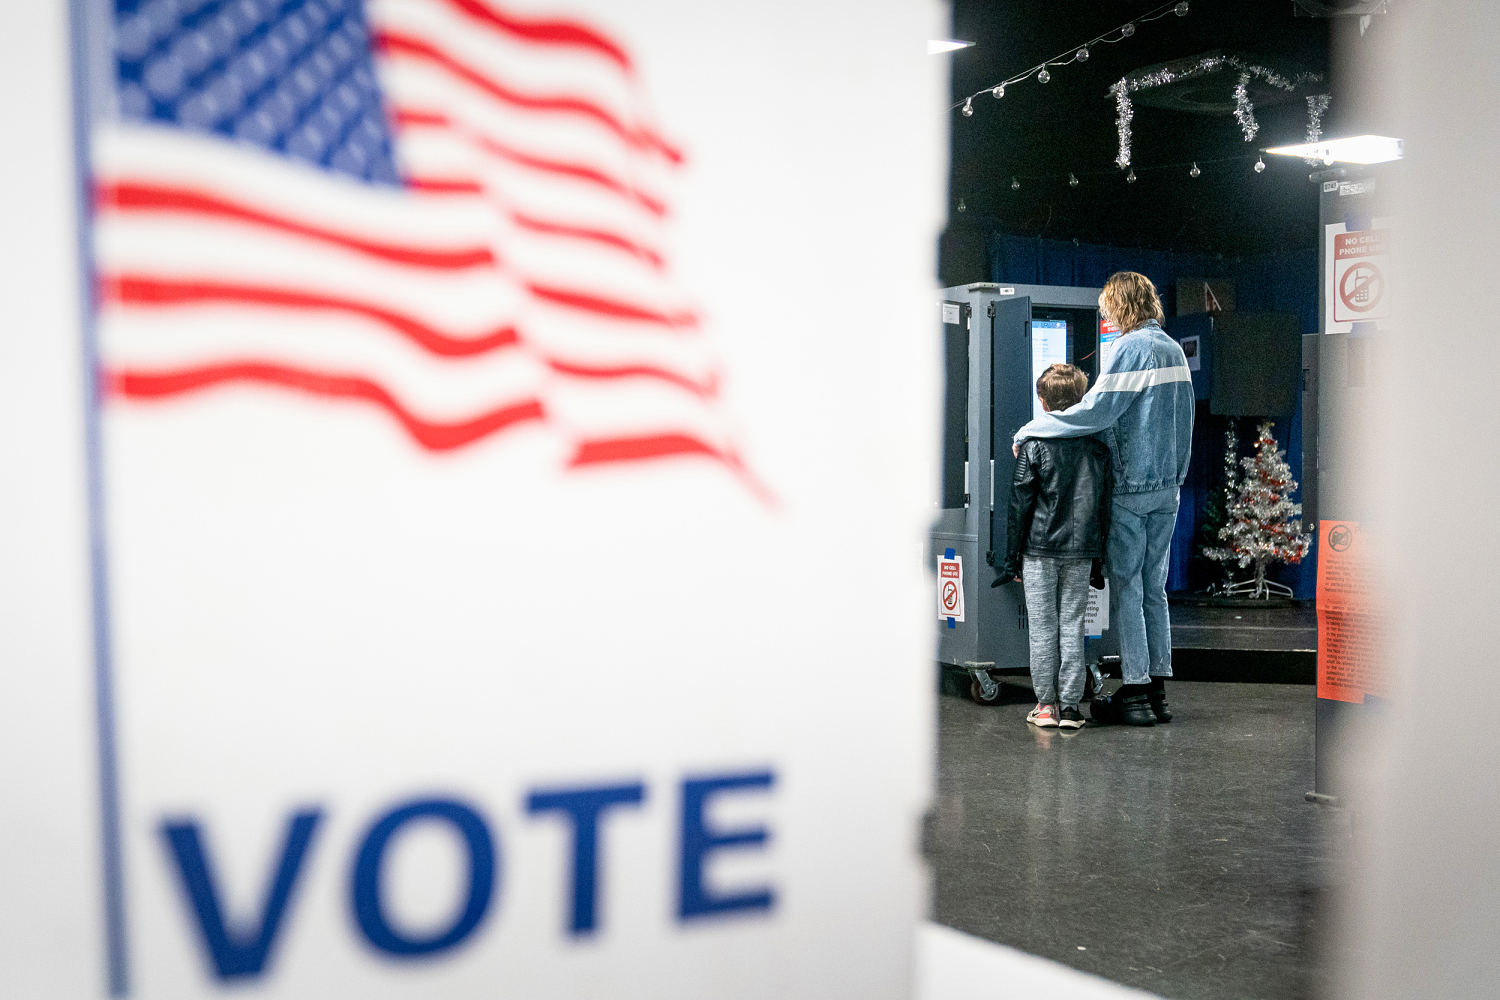 The GOP will deploy 100,000 election workers to swing states for 'election integrity'